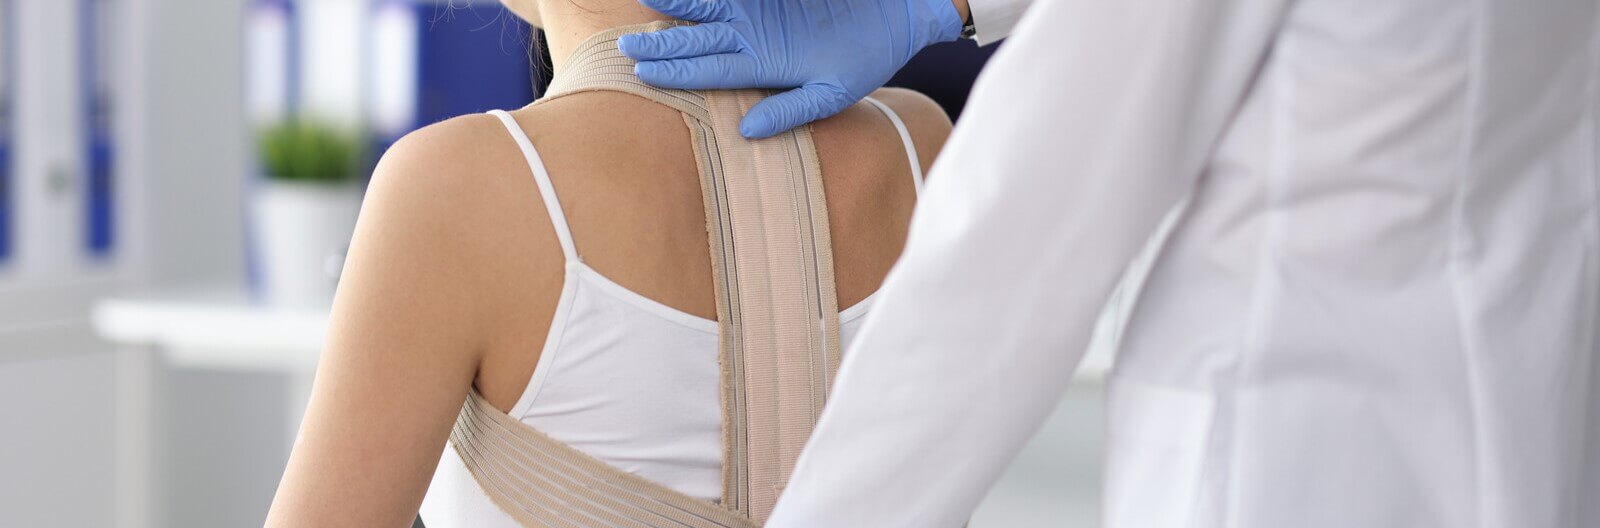 Doctor placing back brace on patient with clavicular fracture 